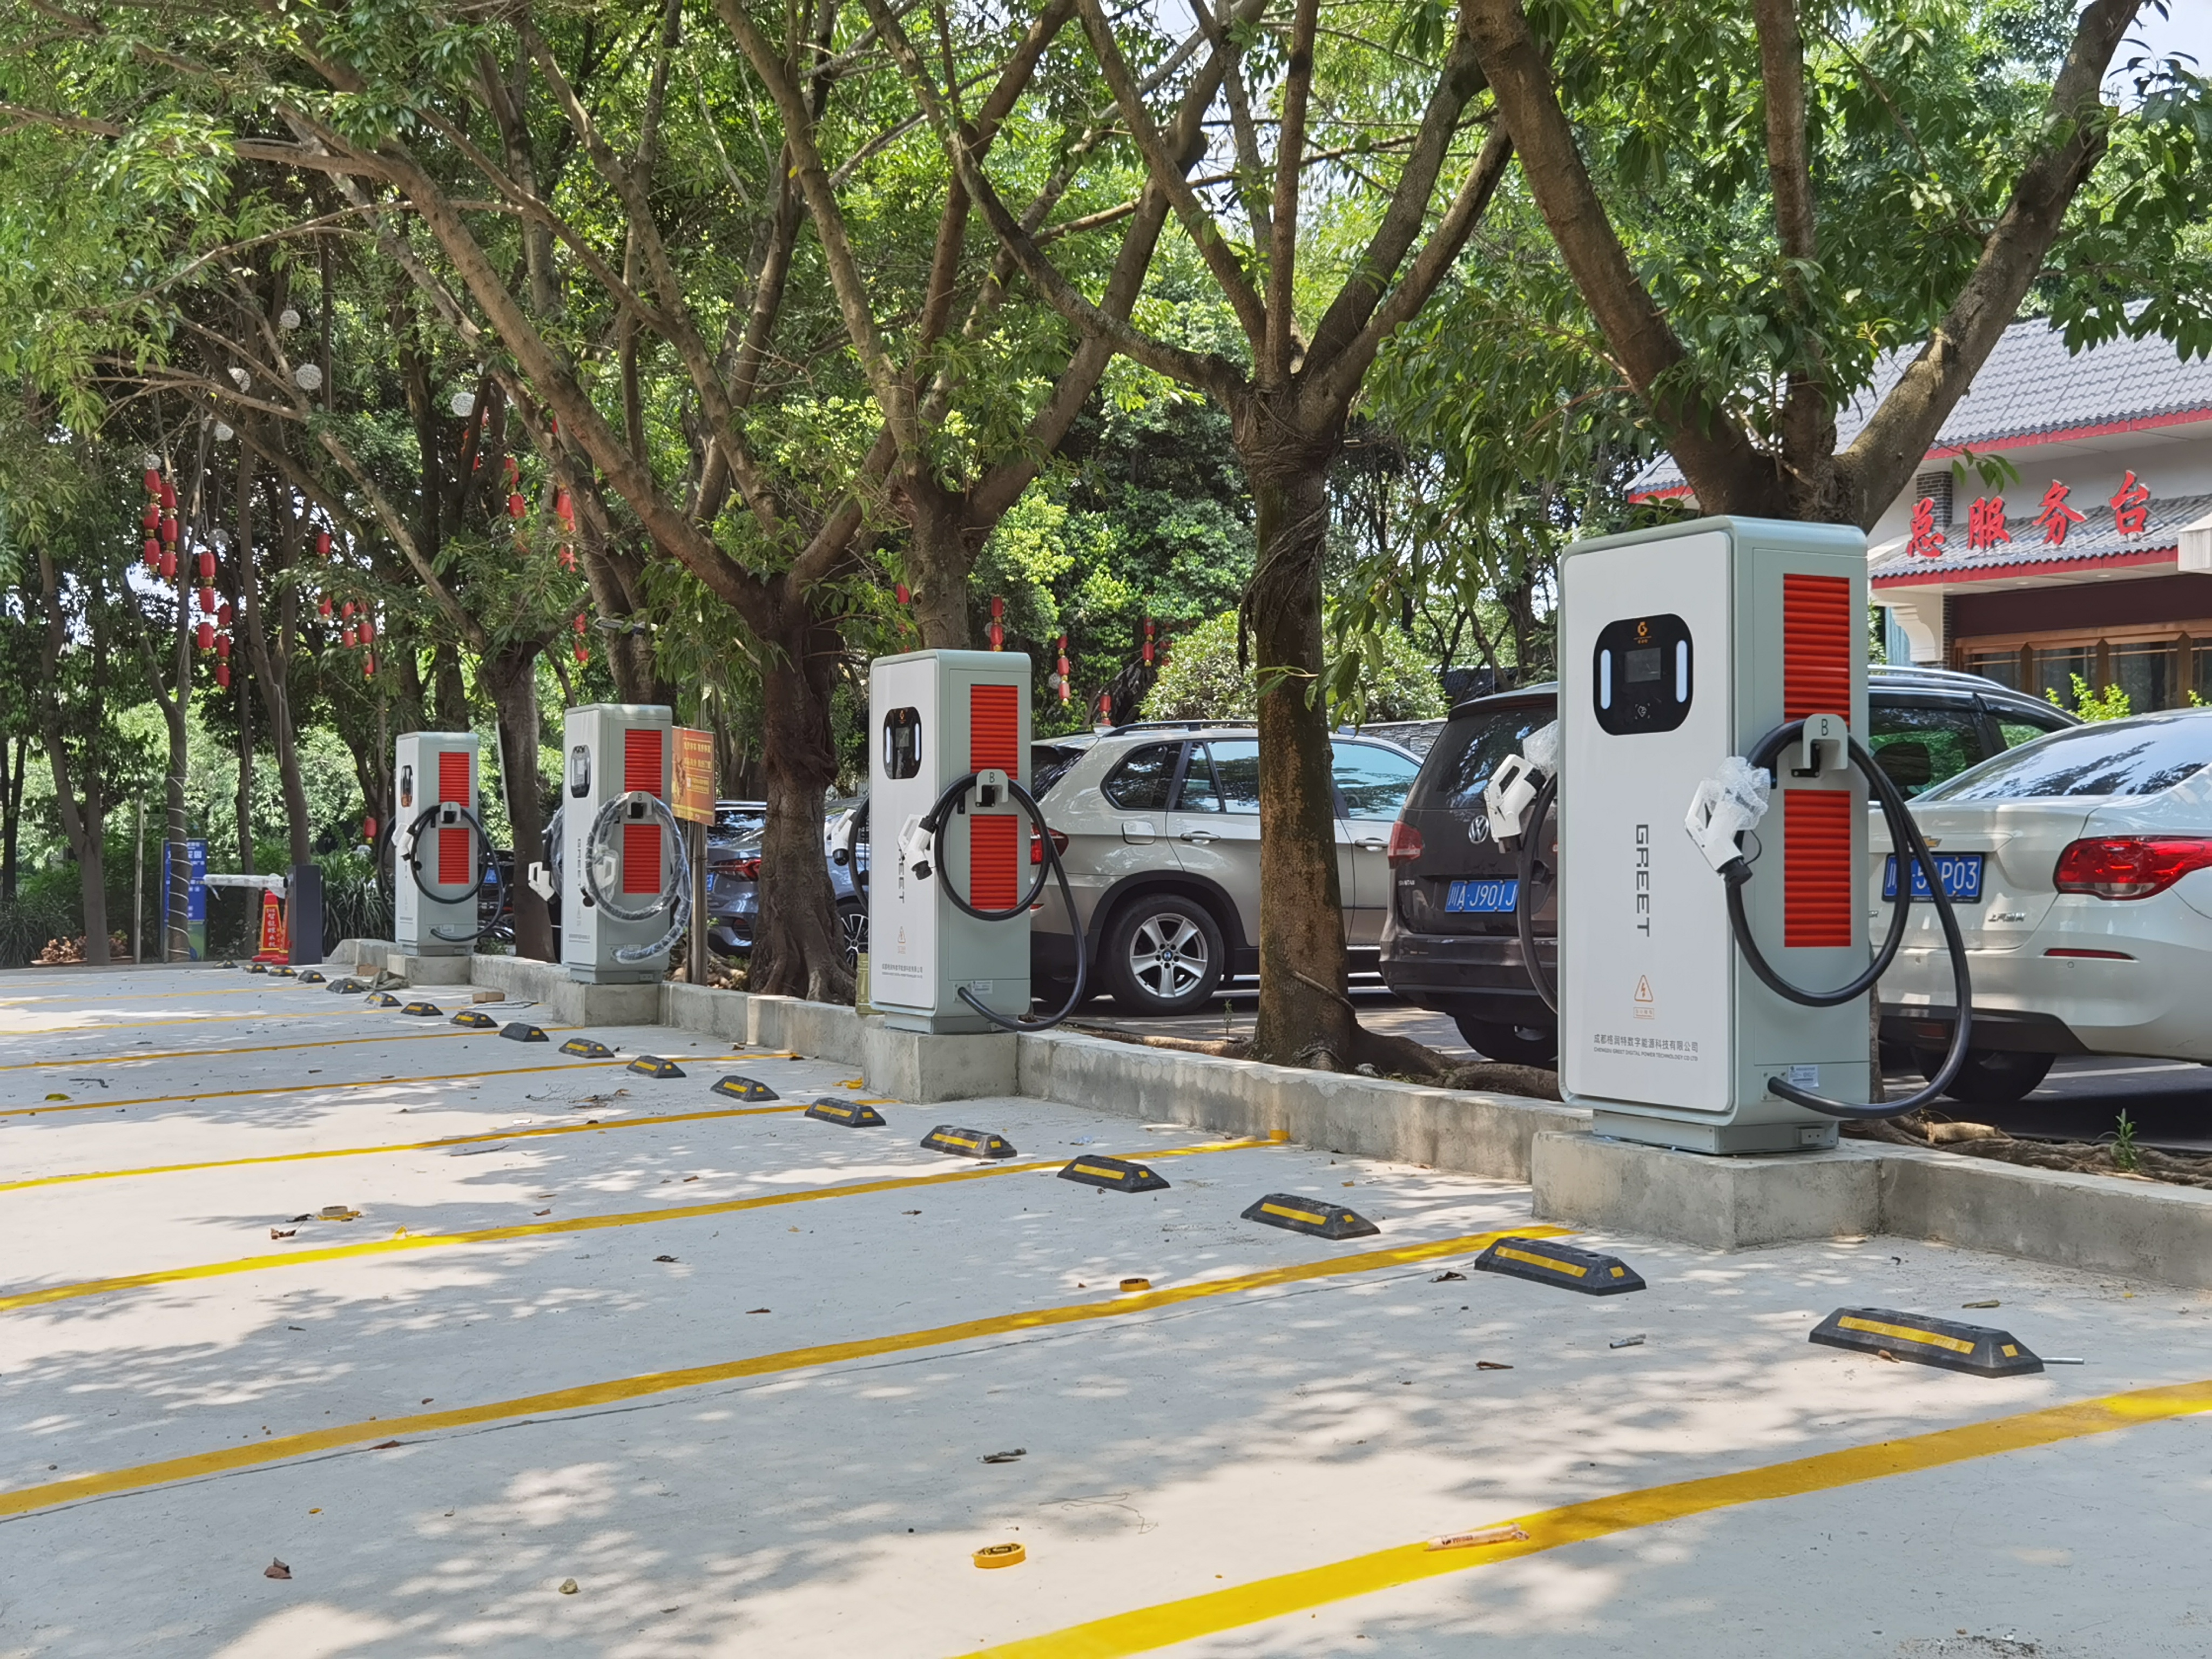 "2023 China Electric Vehicle User Charging Behavior Study Report: Key Abléck an Trends"